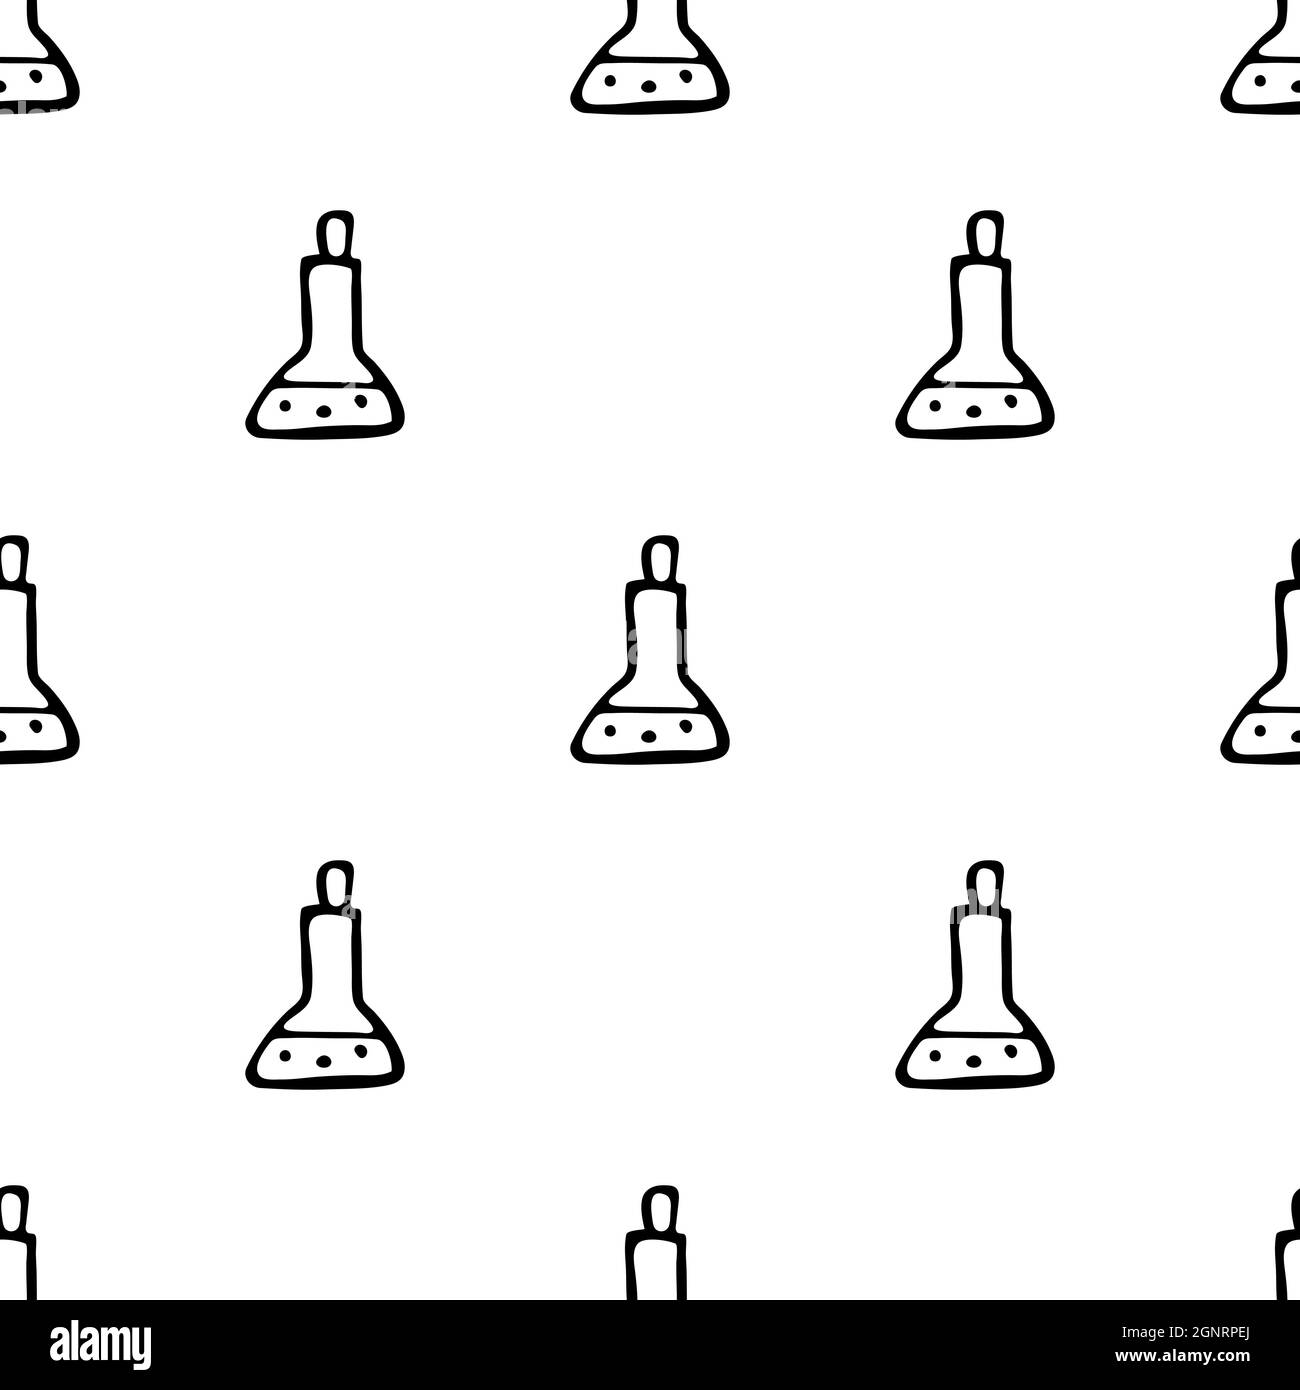 Seamless pattern with hand drawn Test tube. Doodle style vector illustration isolated on white background. For interior design, wallpaper, packaging, Stock Vector